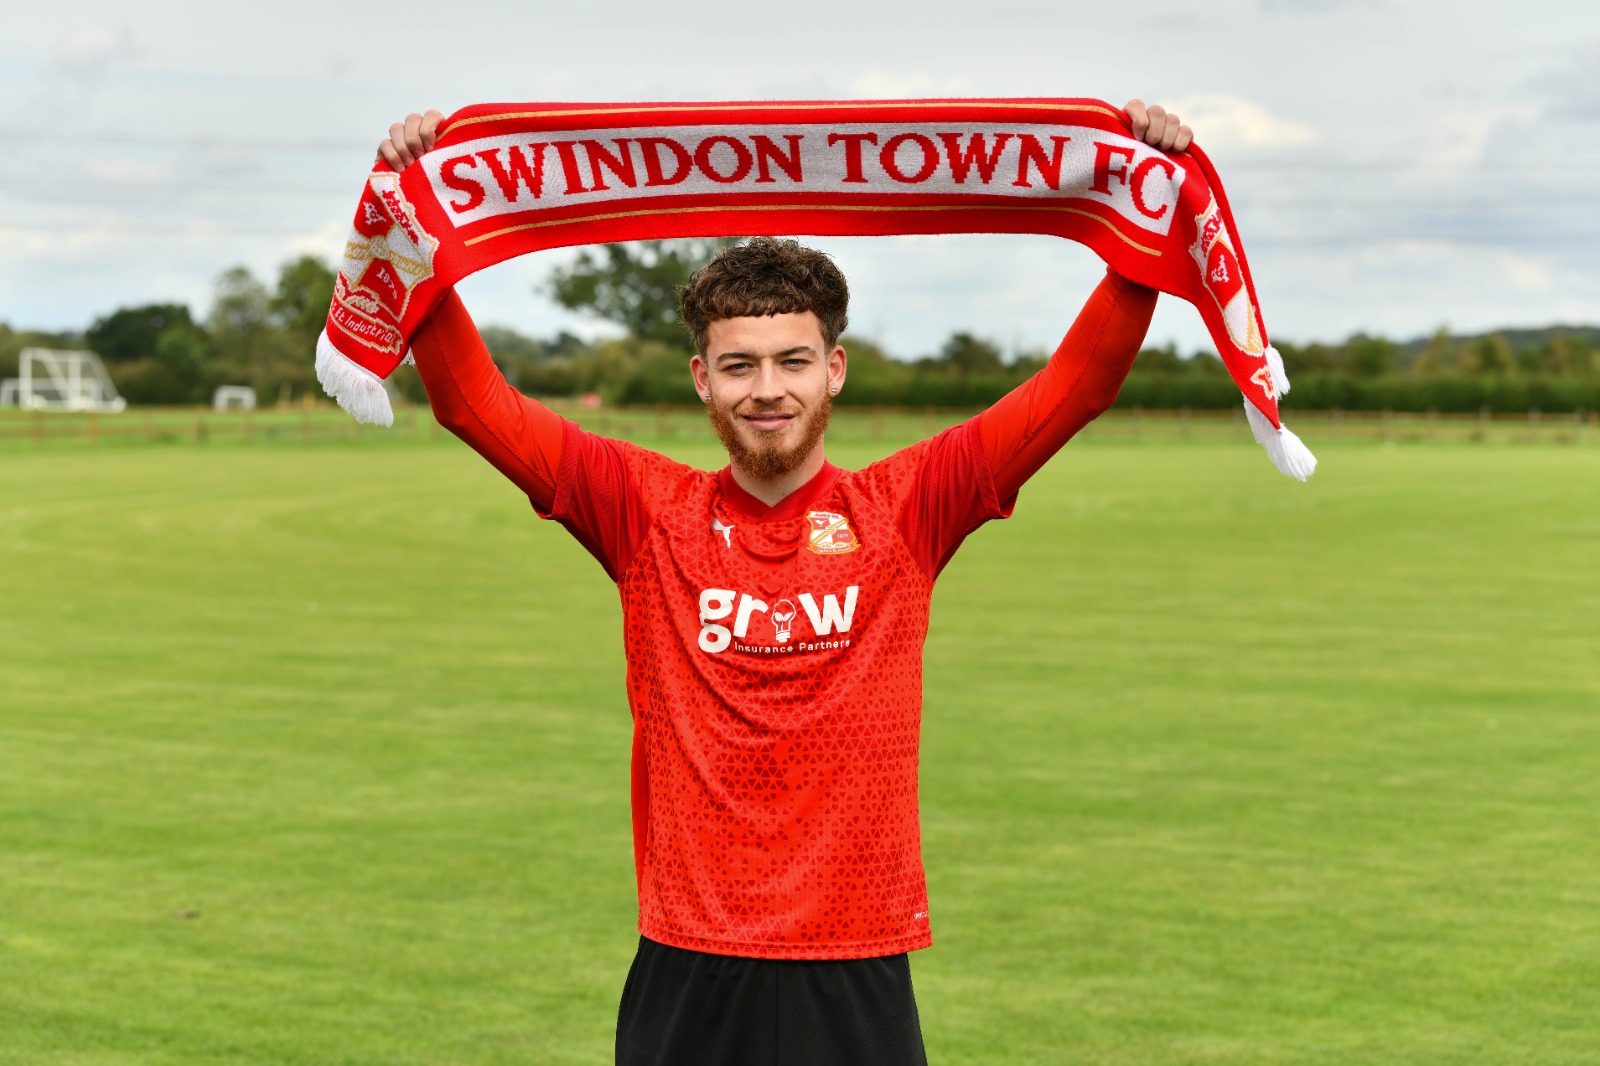 Swindon Town confirm the signing of former Bournemouth defender